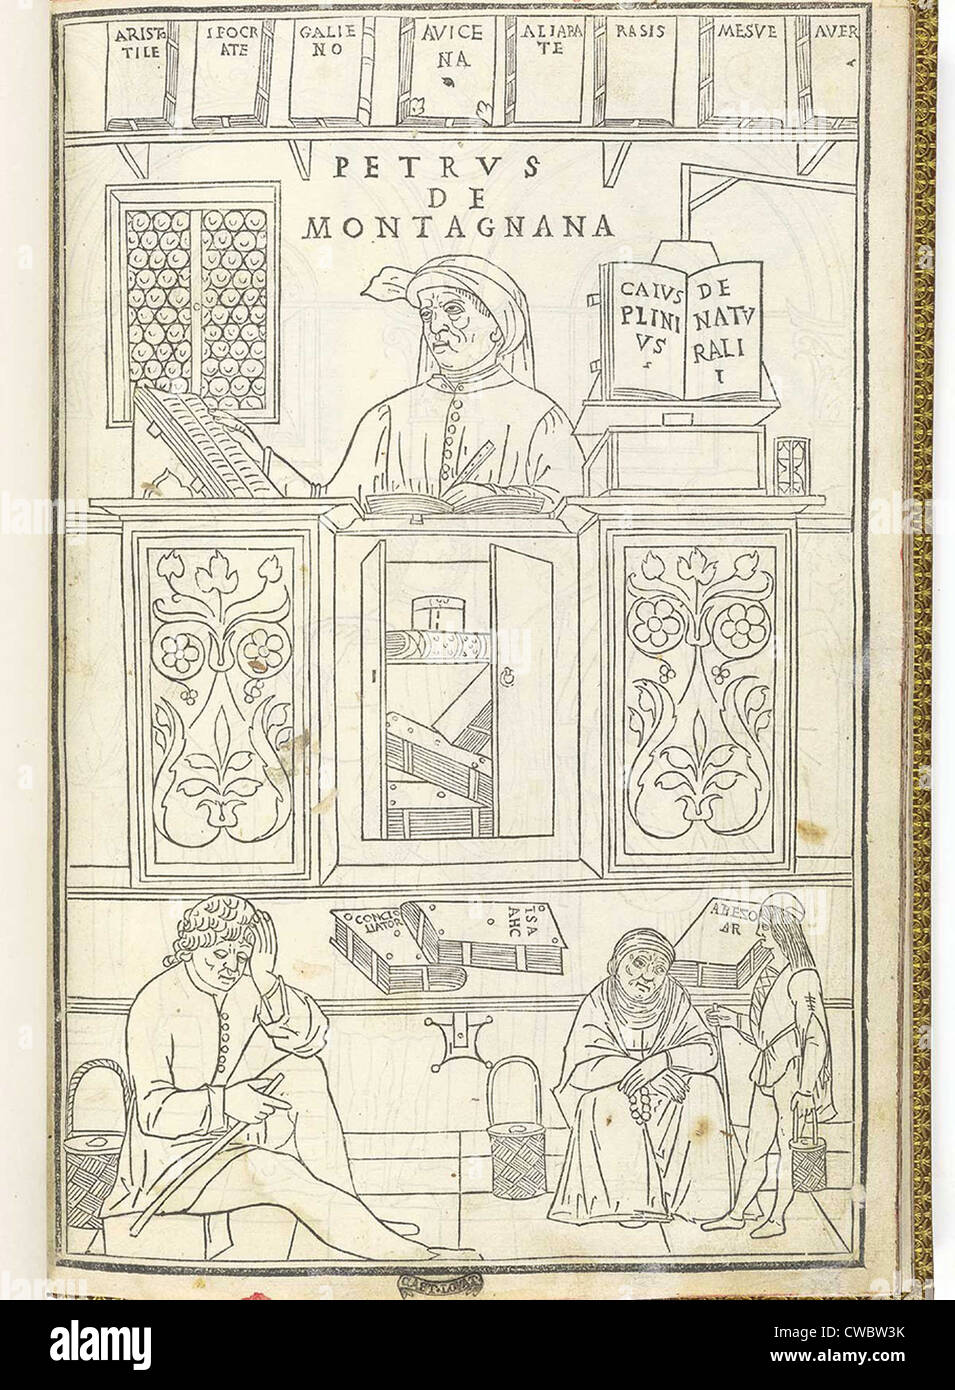 Illustration showing the breadth of medical knowledge in 15th century Italy. A medical scholar (labeled as Petrus de Stock Photo